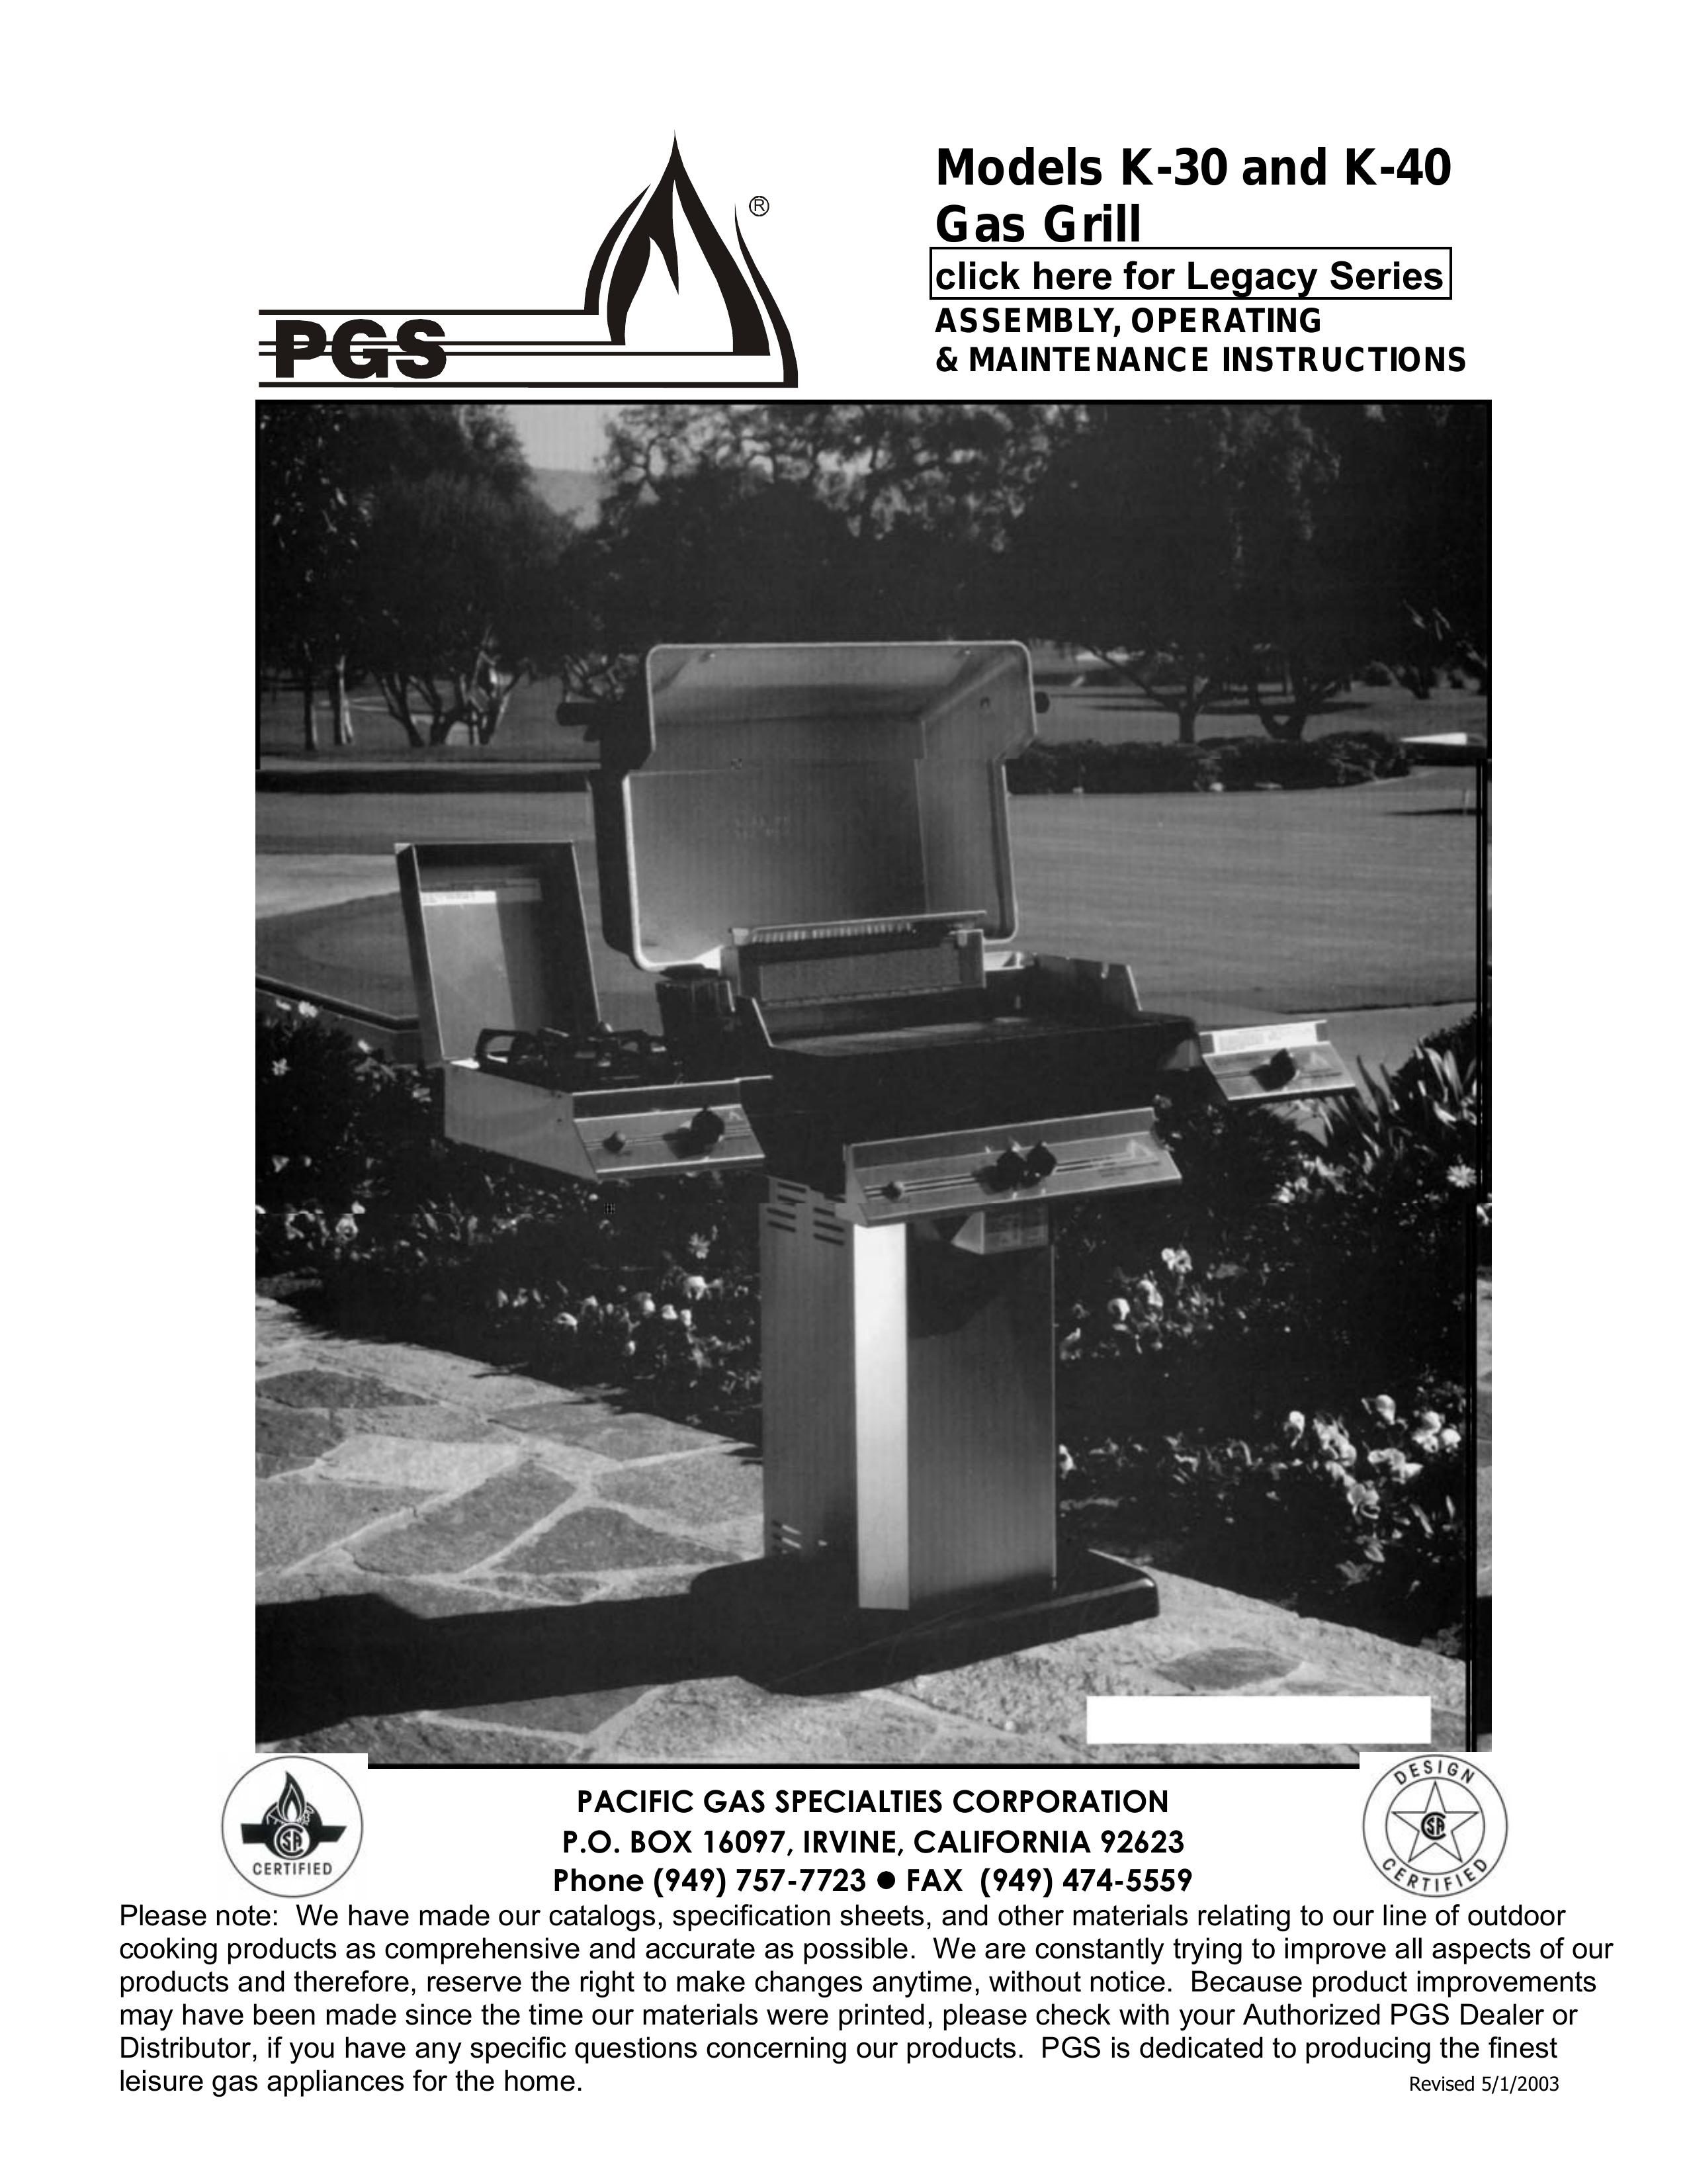 PGS K-30 Gas Grill User Manual